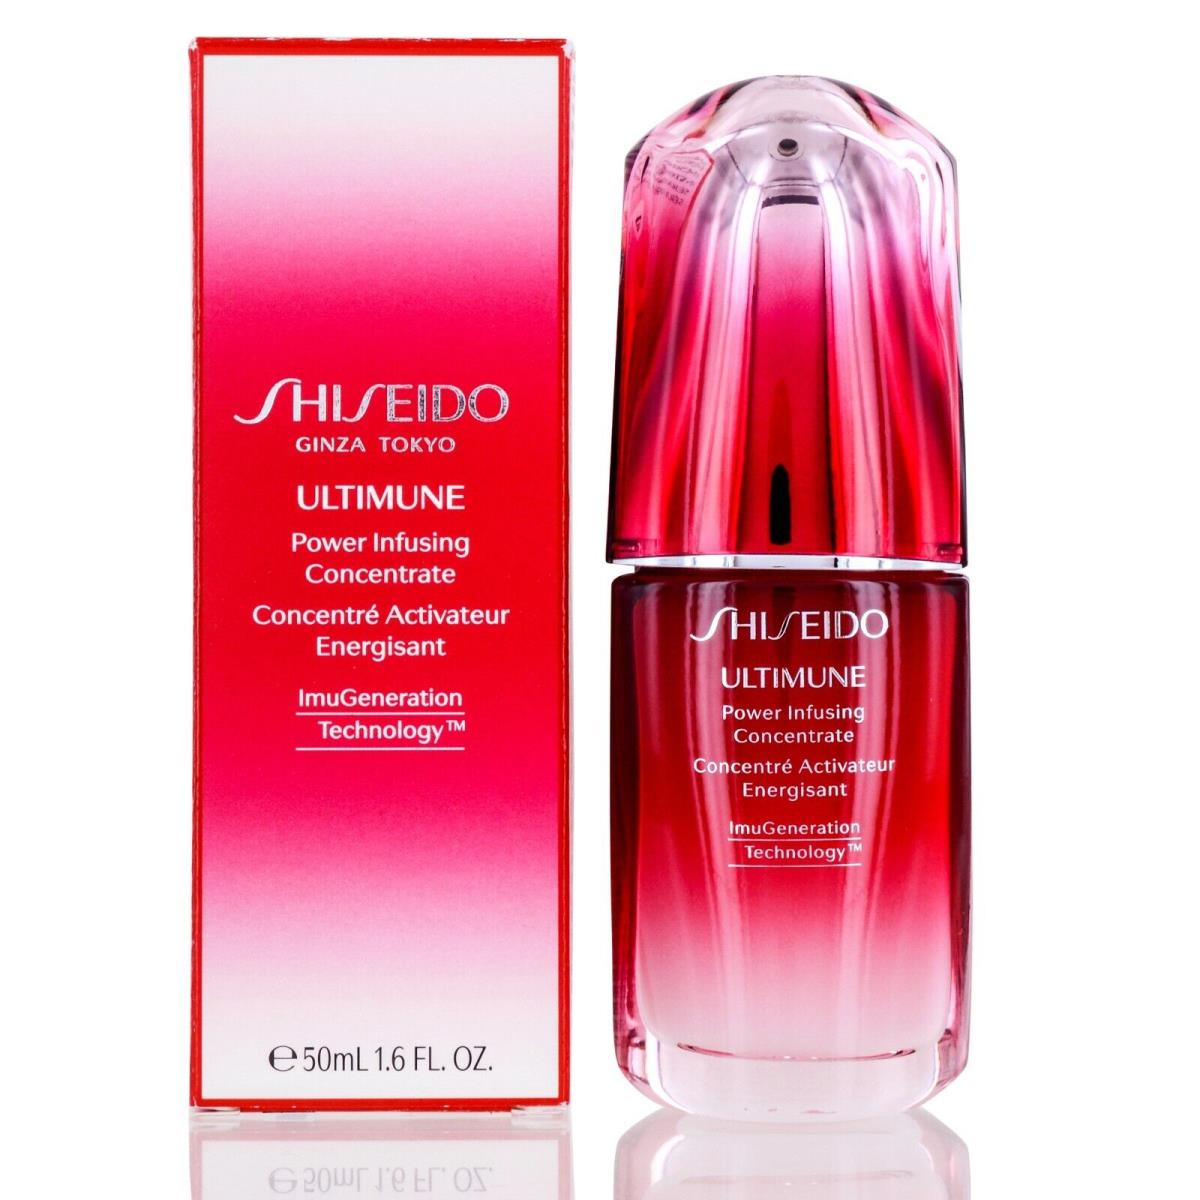 Shiseido/ultimune Power Infusing Concentrate Serum 1.6 OZ 50 ML